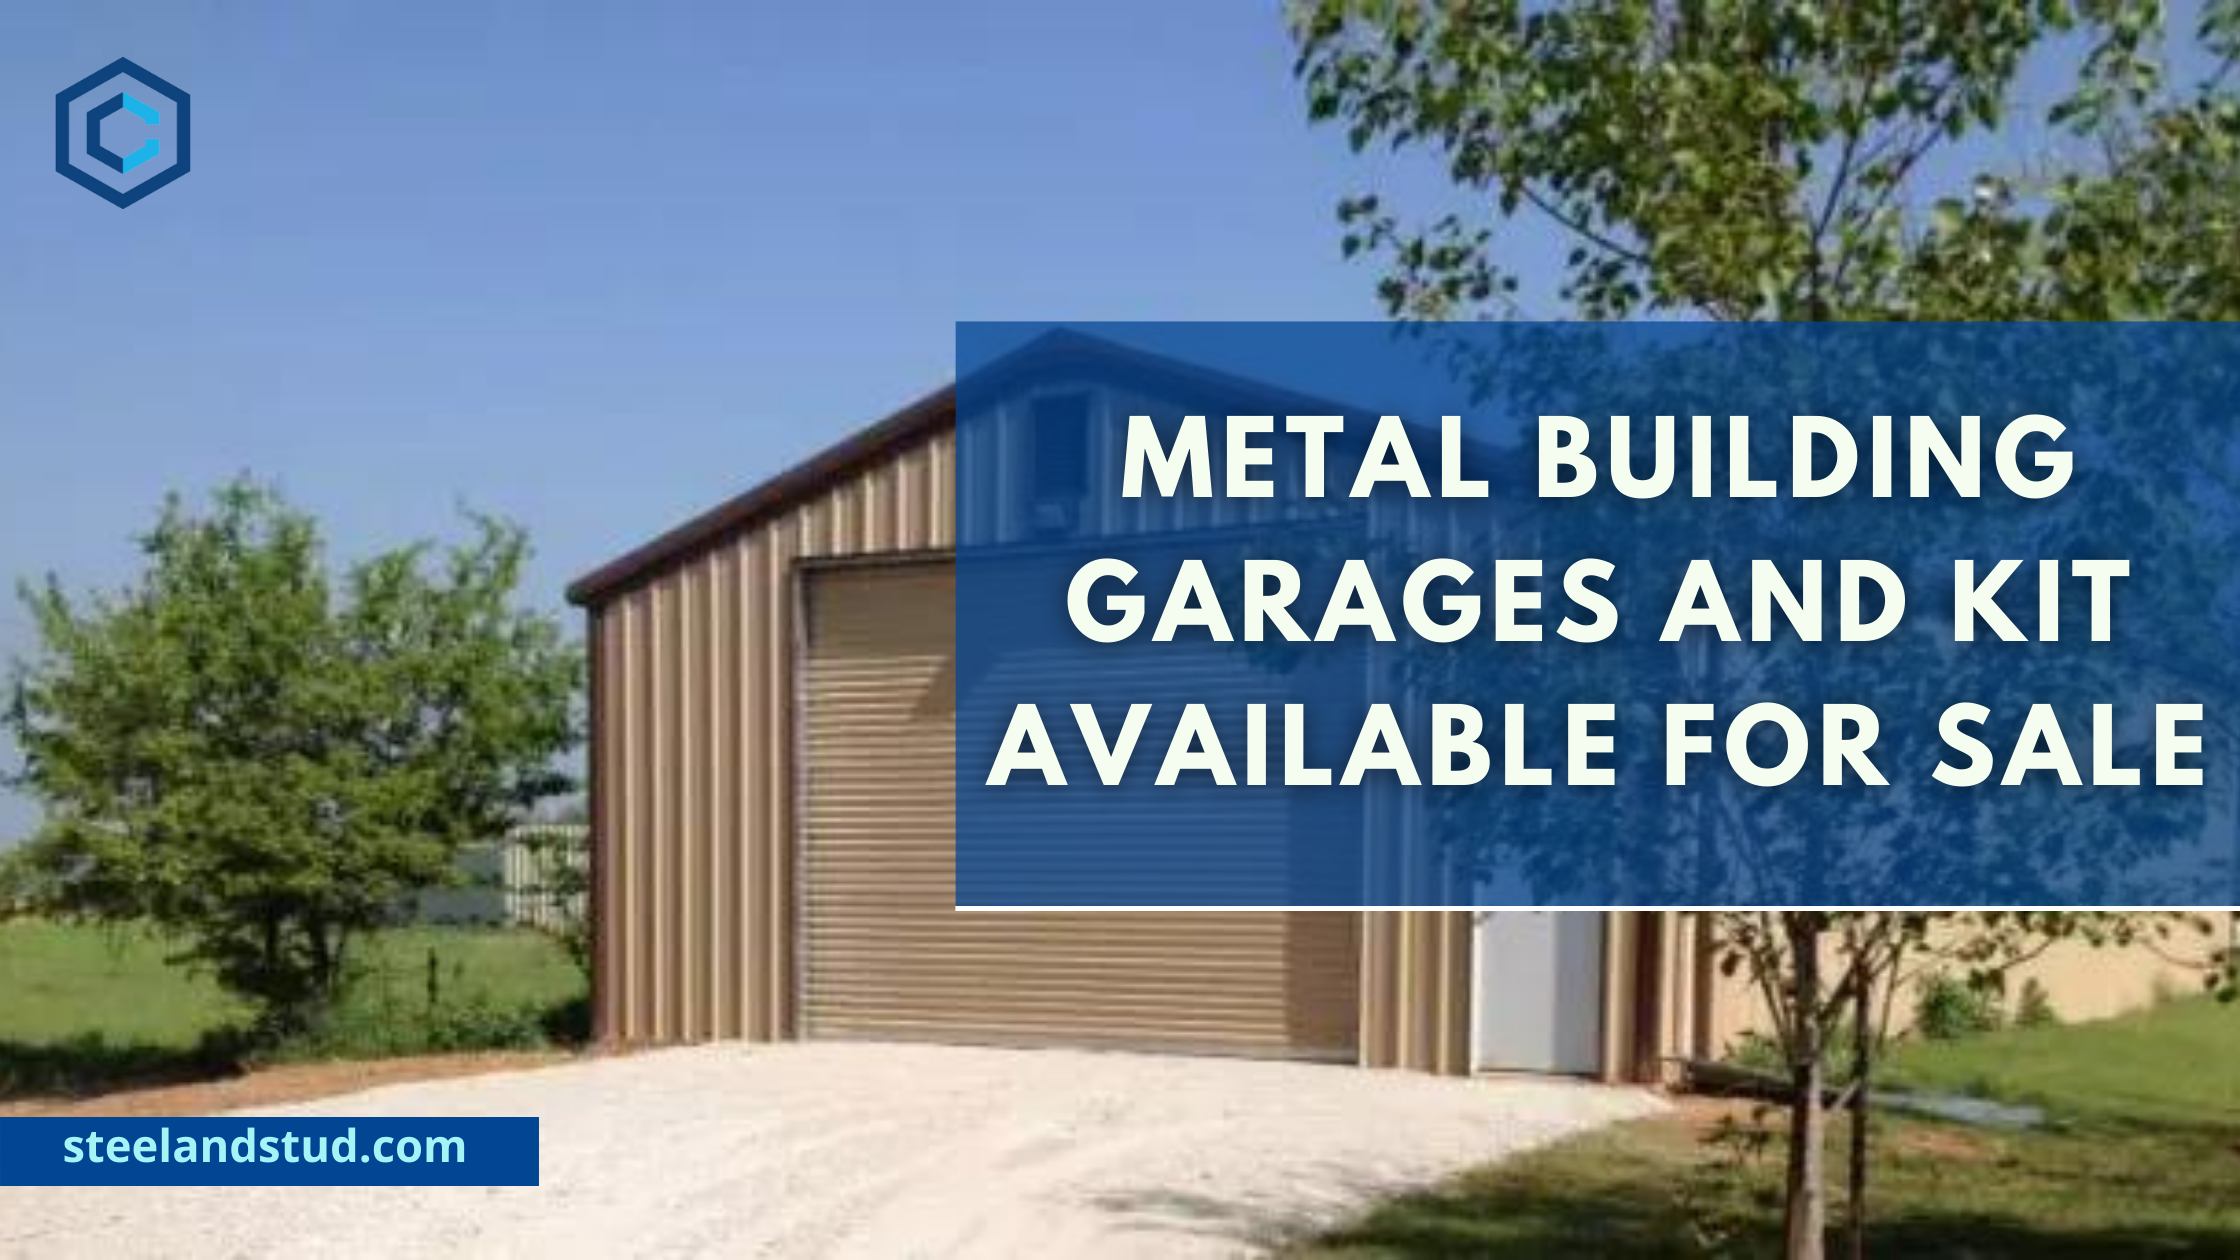 Best Metal Building Garages and Kit Available for Sale